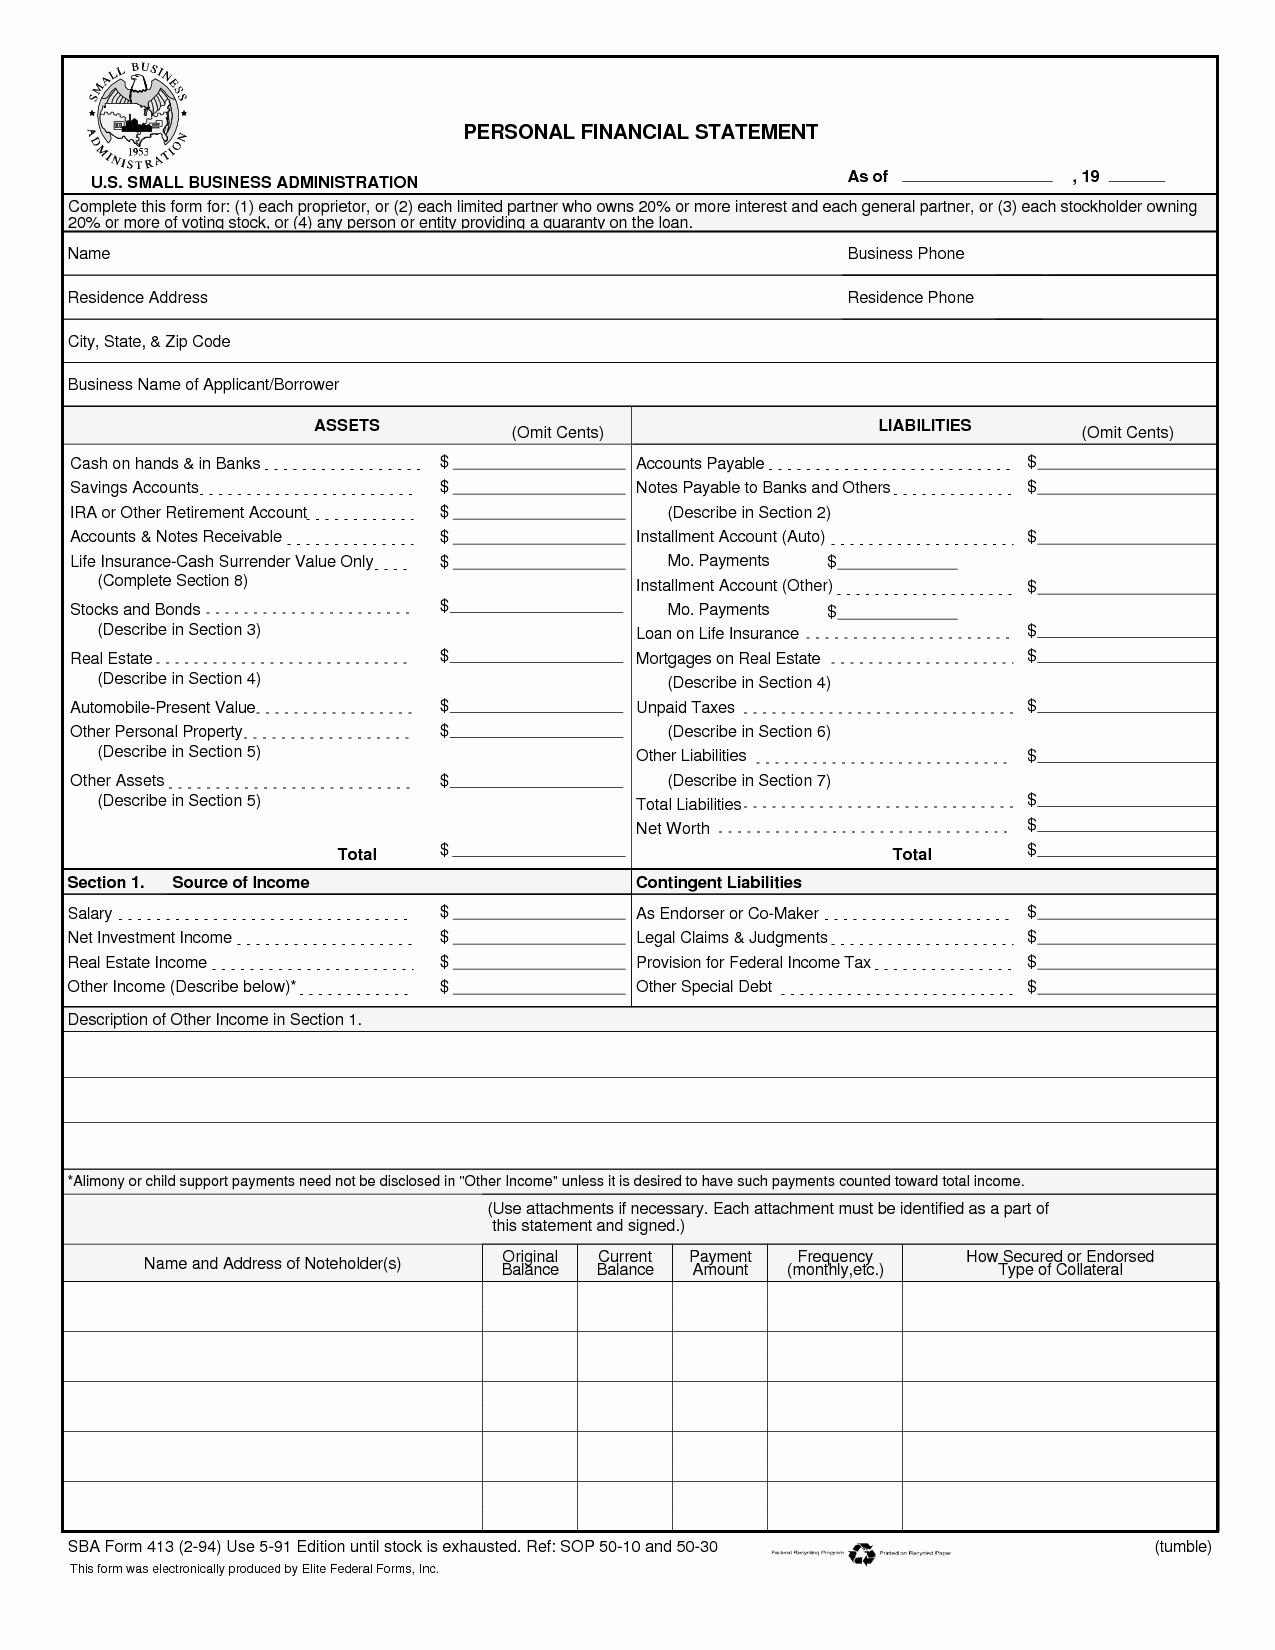 Small Business Income Statement Template Unique Sample In E Statement for Small Business Business